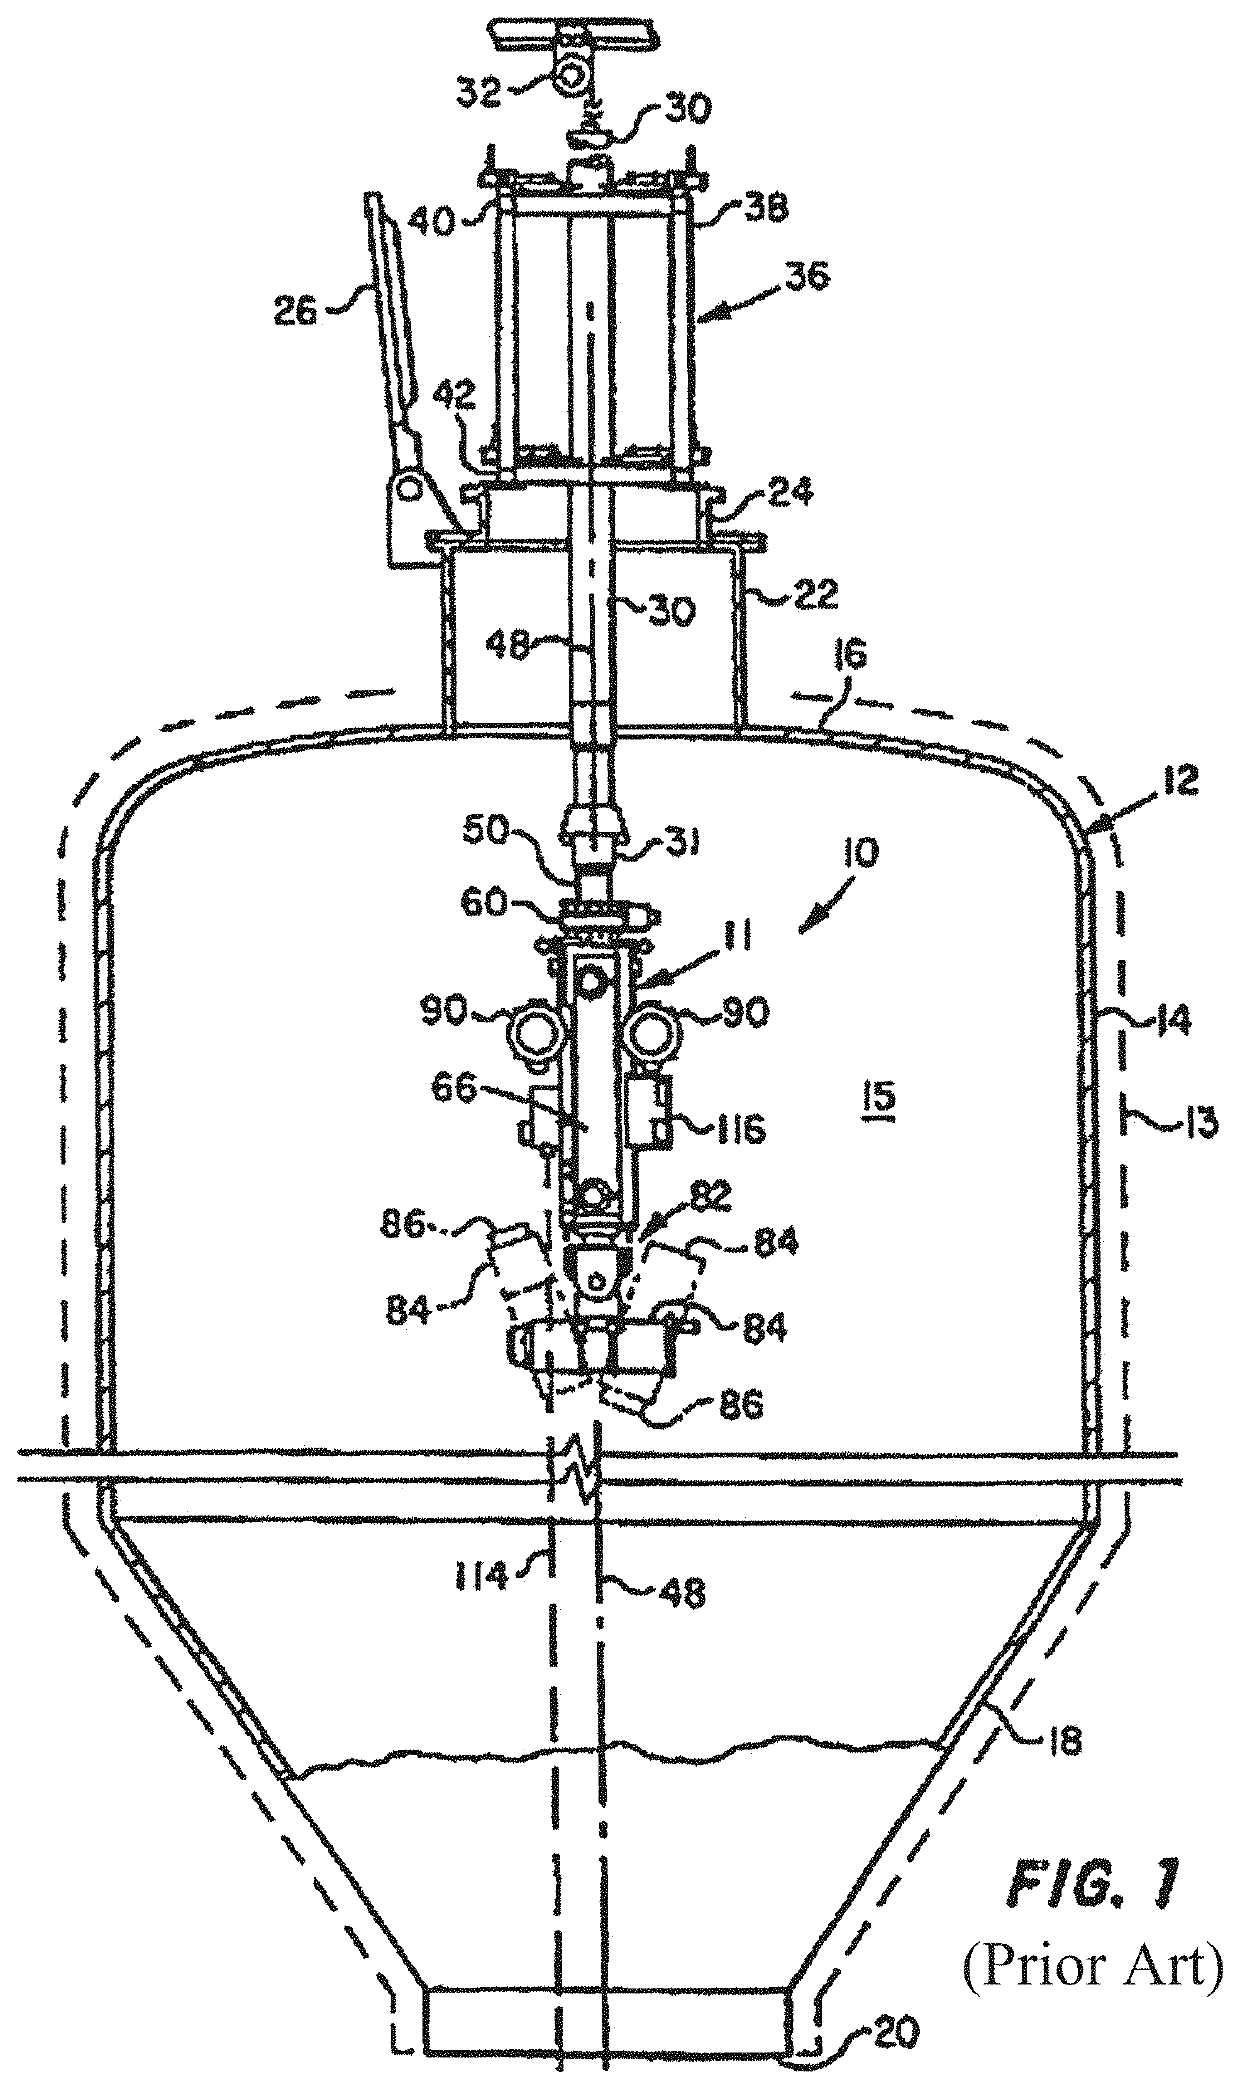 Delayed Petroleum Coking Vessel Inspection Device and Method